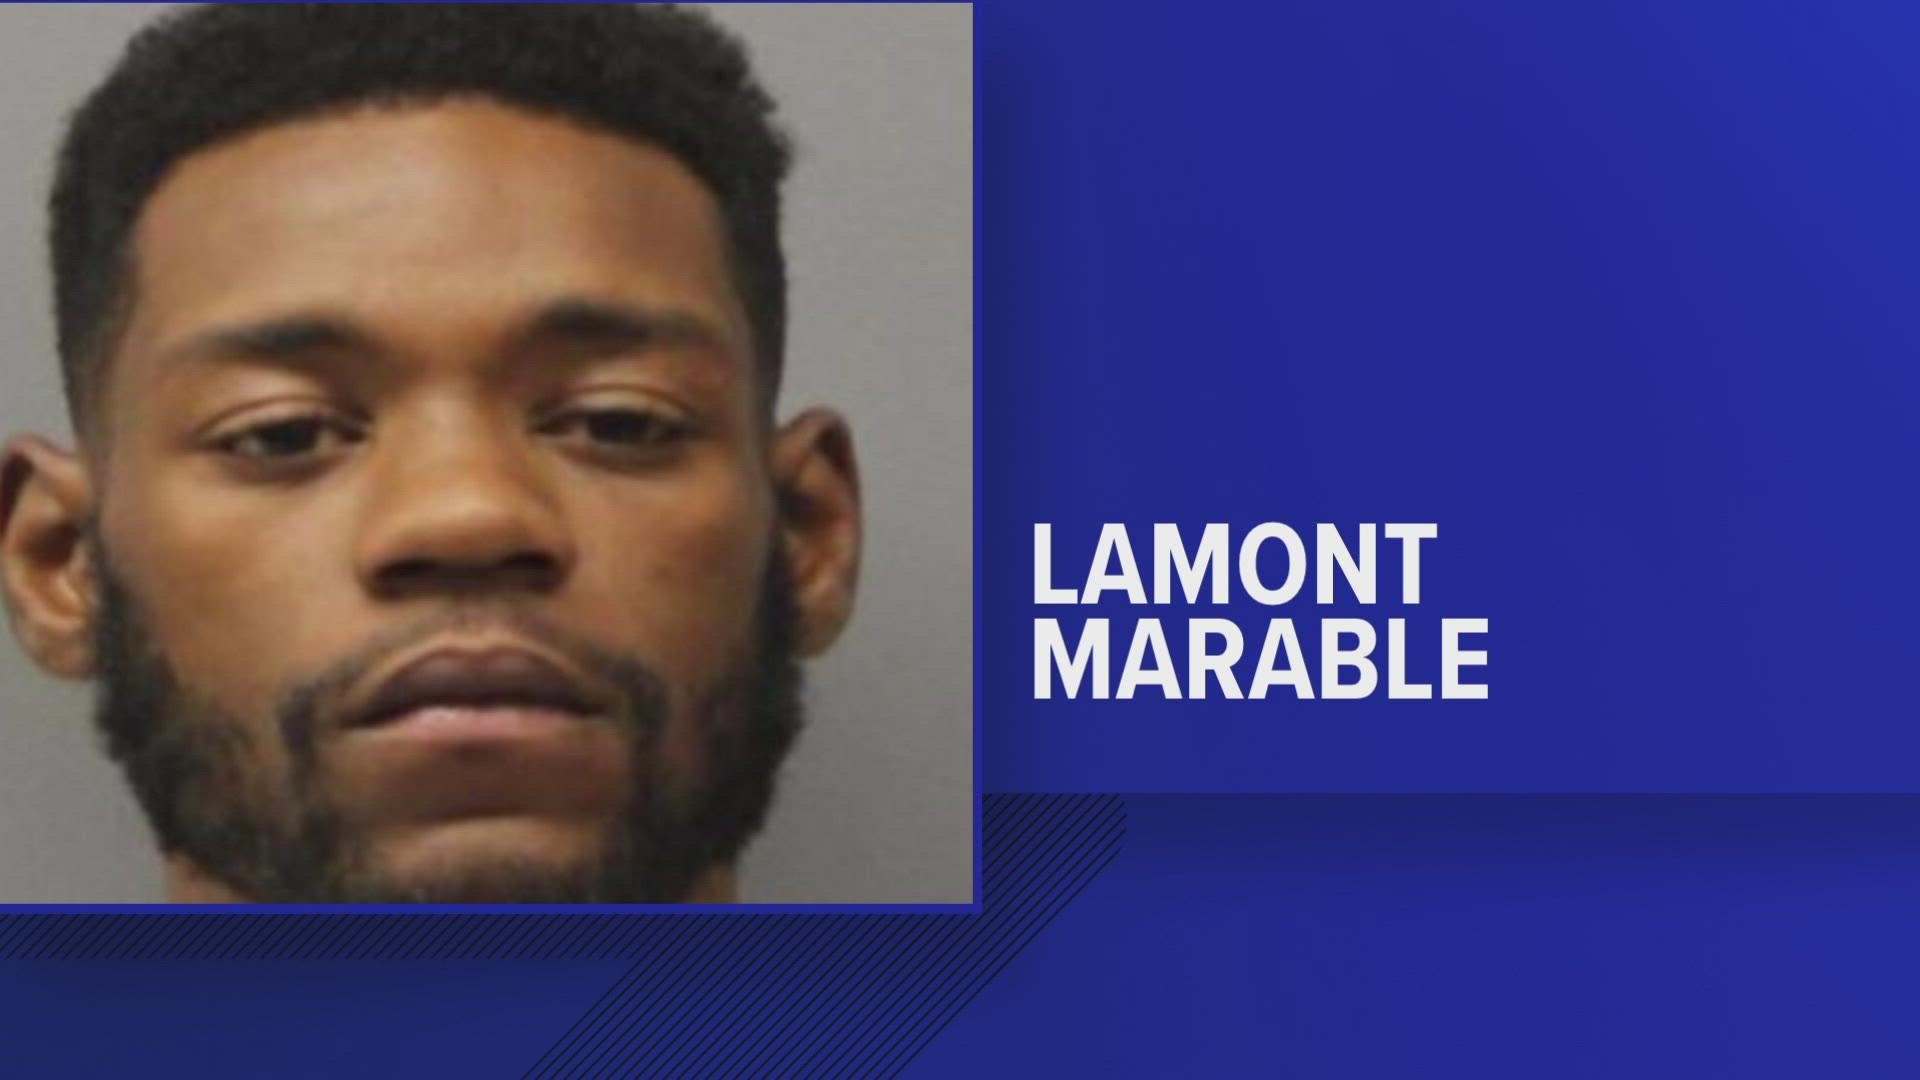 Police identified 25-year-old Lamont Marable as a suspect.